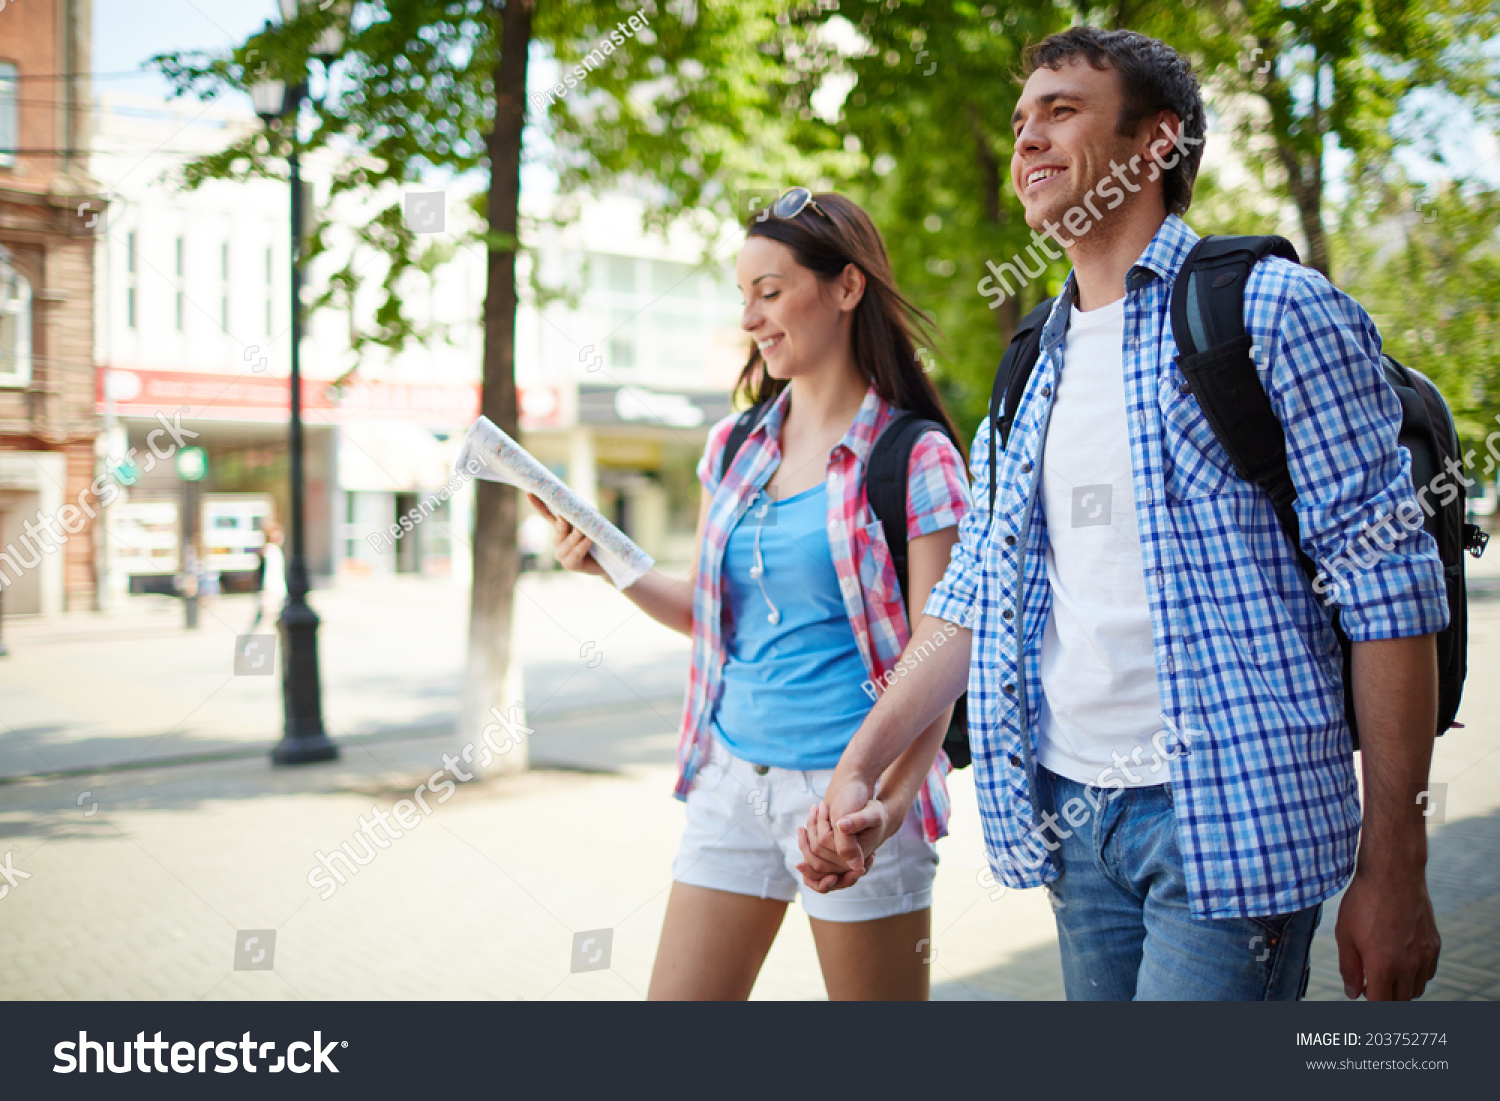 Couple of young travelers taking walk during journey #203752774